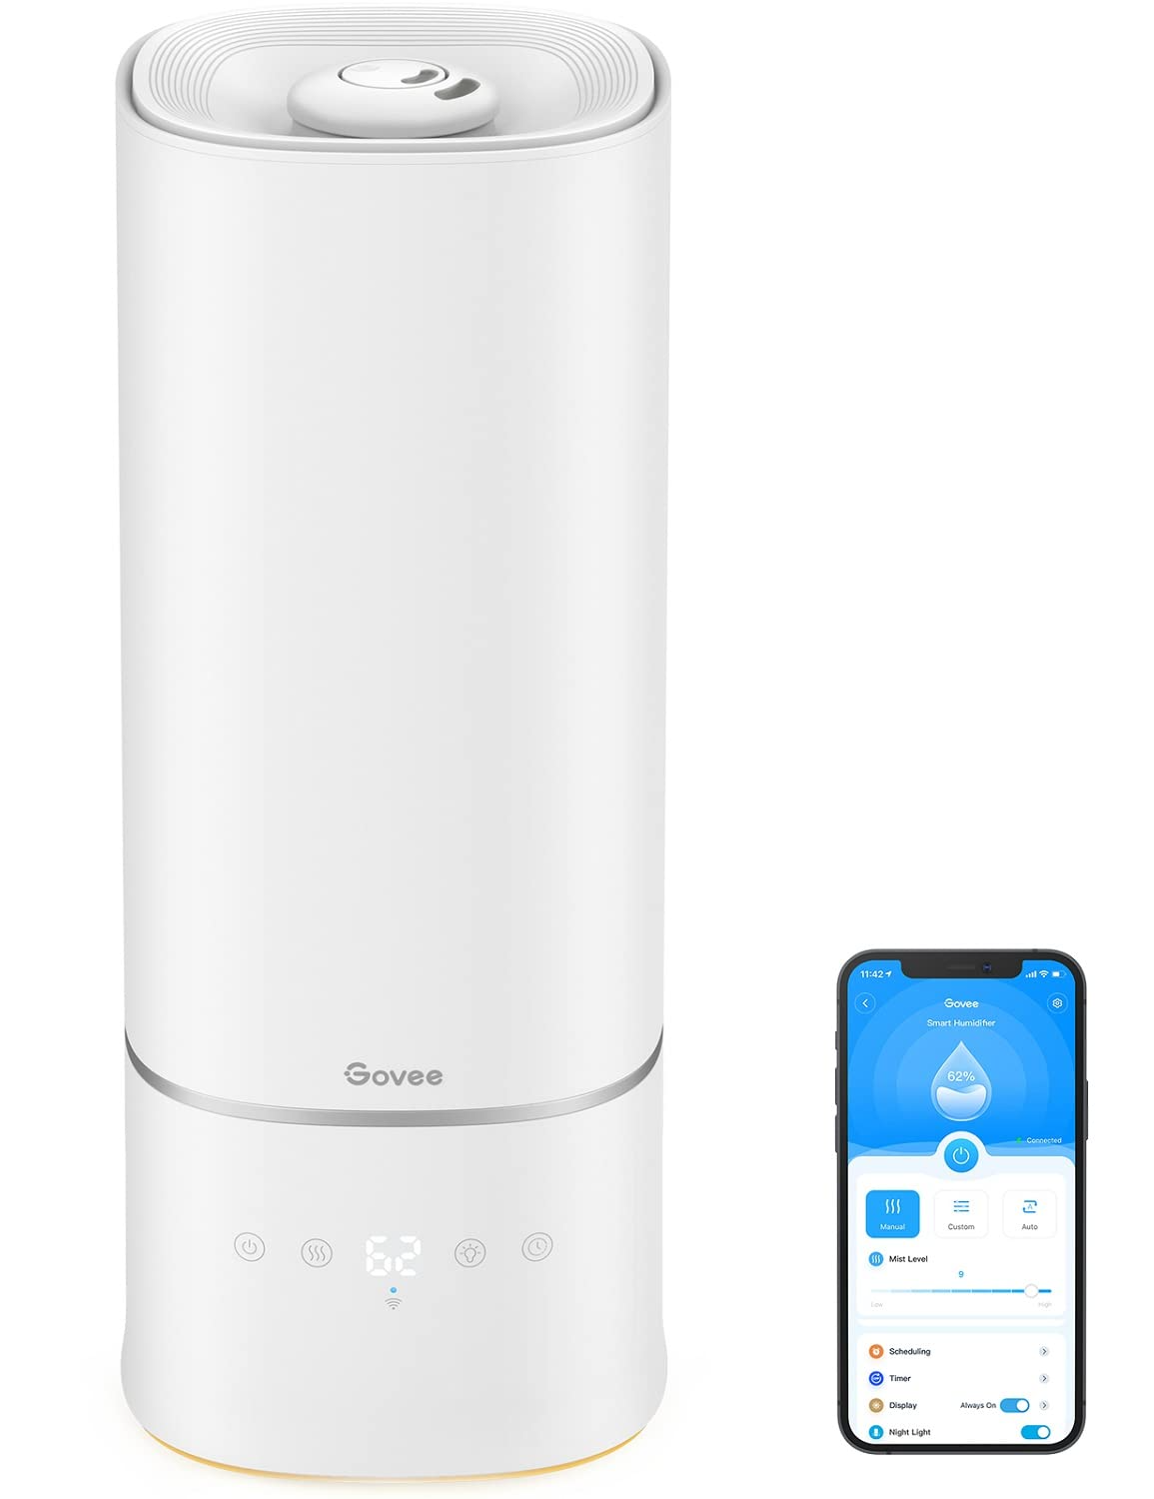 Govee 6L Smart WiFi Humidifier for Bedroom, Top Fill Cool Mist Humidifier with App Control, Essential Oil Diffuser and Night Light - $60